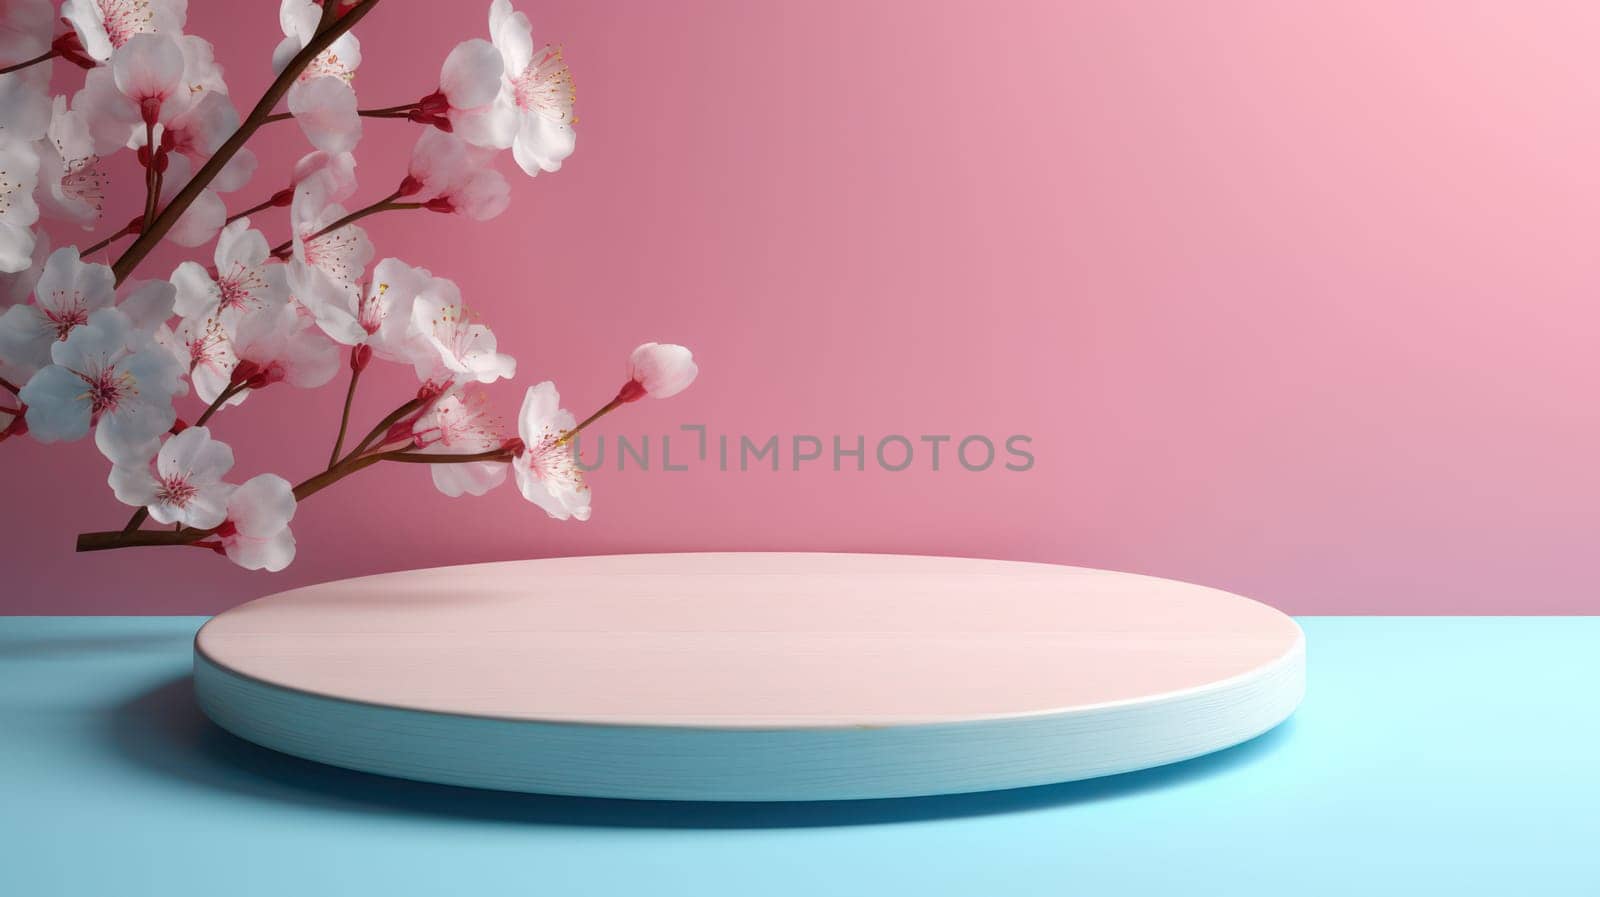 Minimalistic Pastel Pink Abstract Geometric Design on Clean White Background with Empty Pedestal: A Modern Floral Showcase for Fashion Presentation by Vichizh